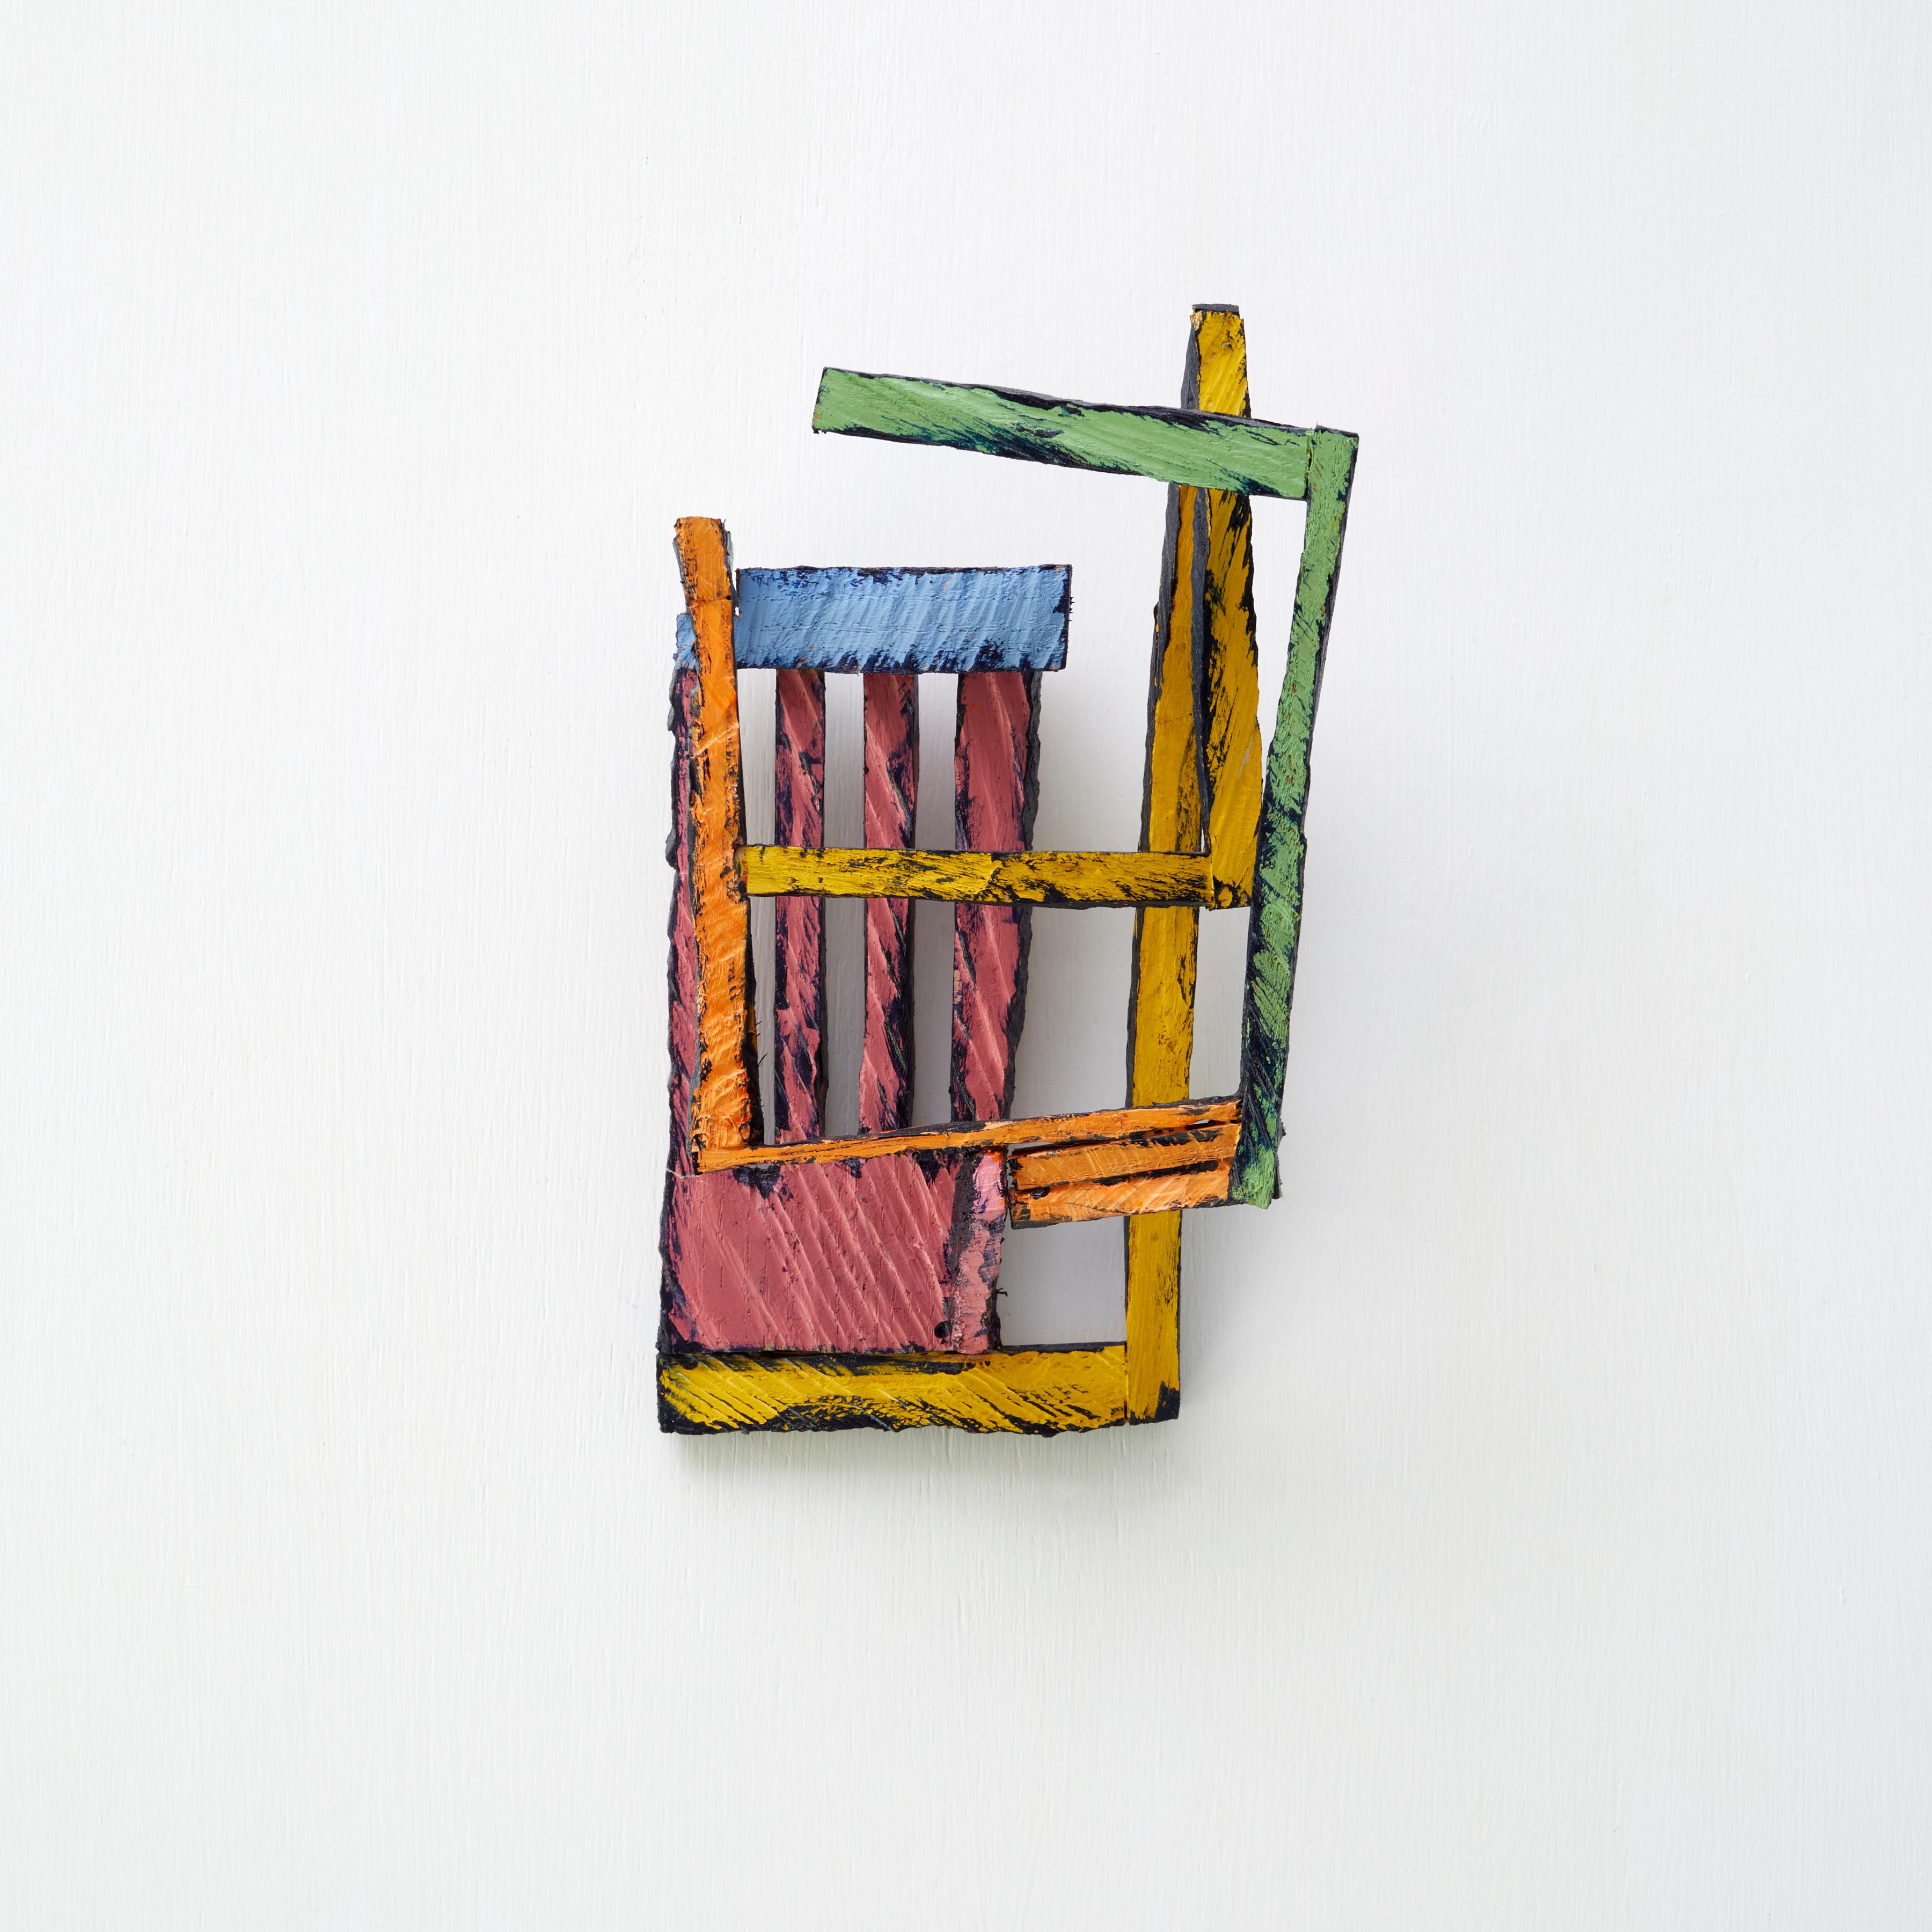 Joe Sultan Abstract Sculpture - L7, bright multicolored abstract geometric wooden sculpture